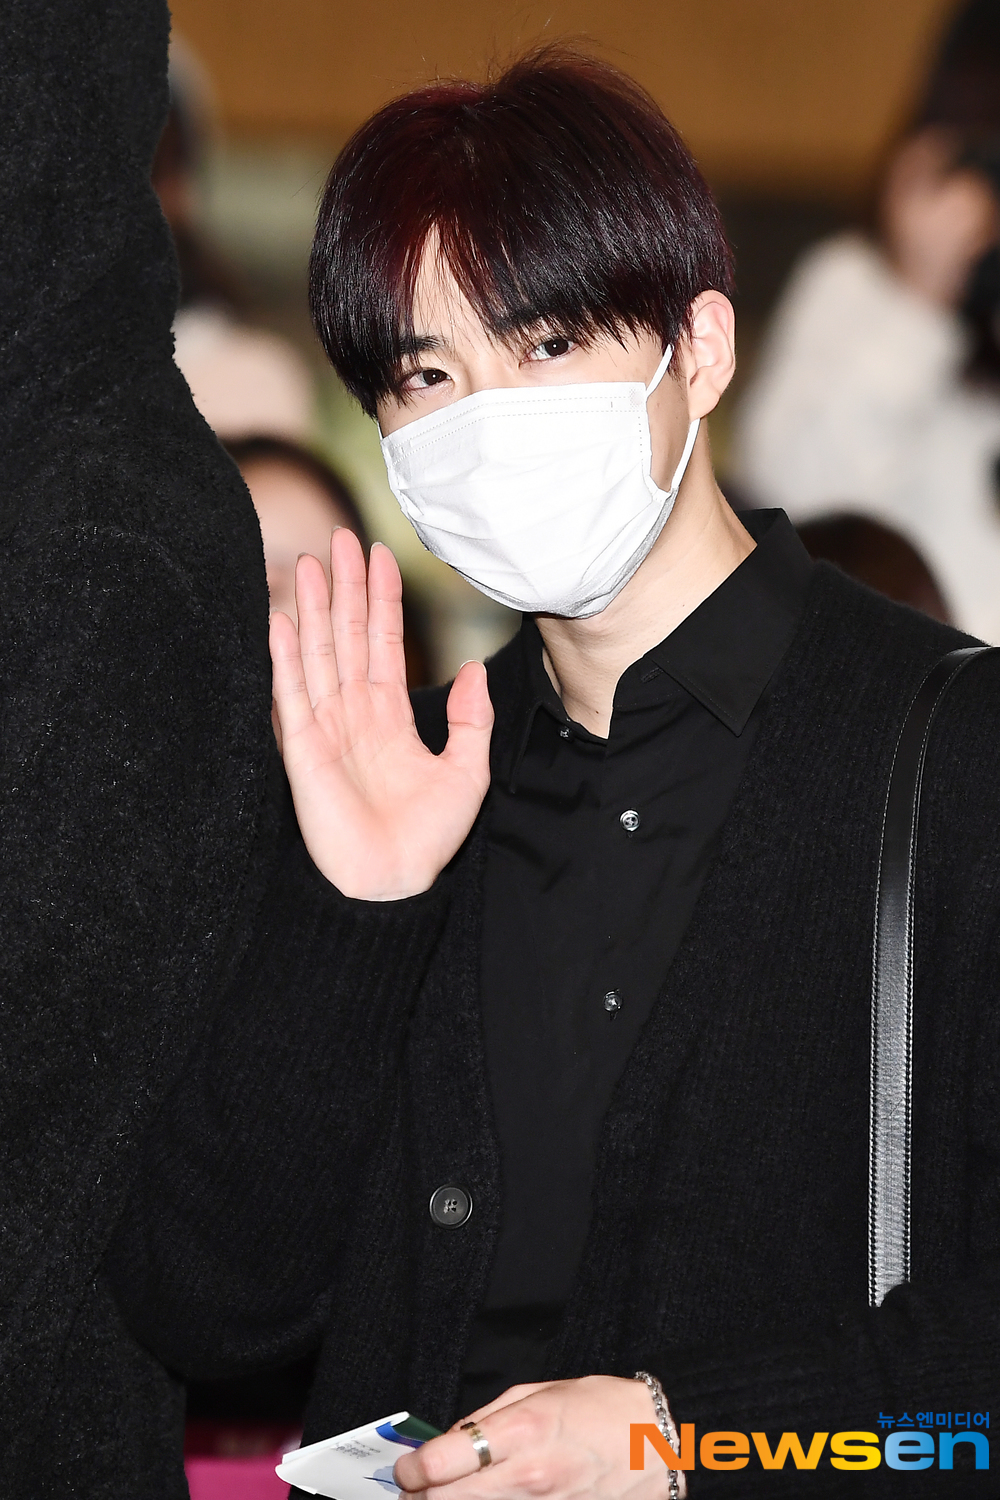 <p>EXO(EXO) member, guardian, Chanyeol, Kai, background, Sehun, Chen 10 November 17 Afternoon Seoul Gangseo way car Gimpo International Airport through the ‘EXO PLANET #5 - EXplOration - In Japan’ schedule to attend car Japan Osaka University the country had.</p><p>EXO(EXO) members can sign Japan Osaka University the country has.</p>